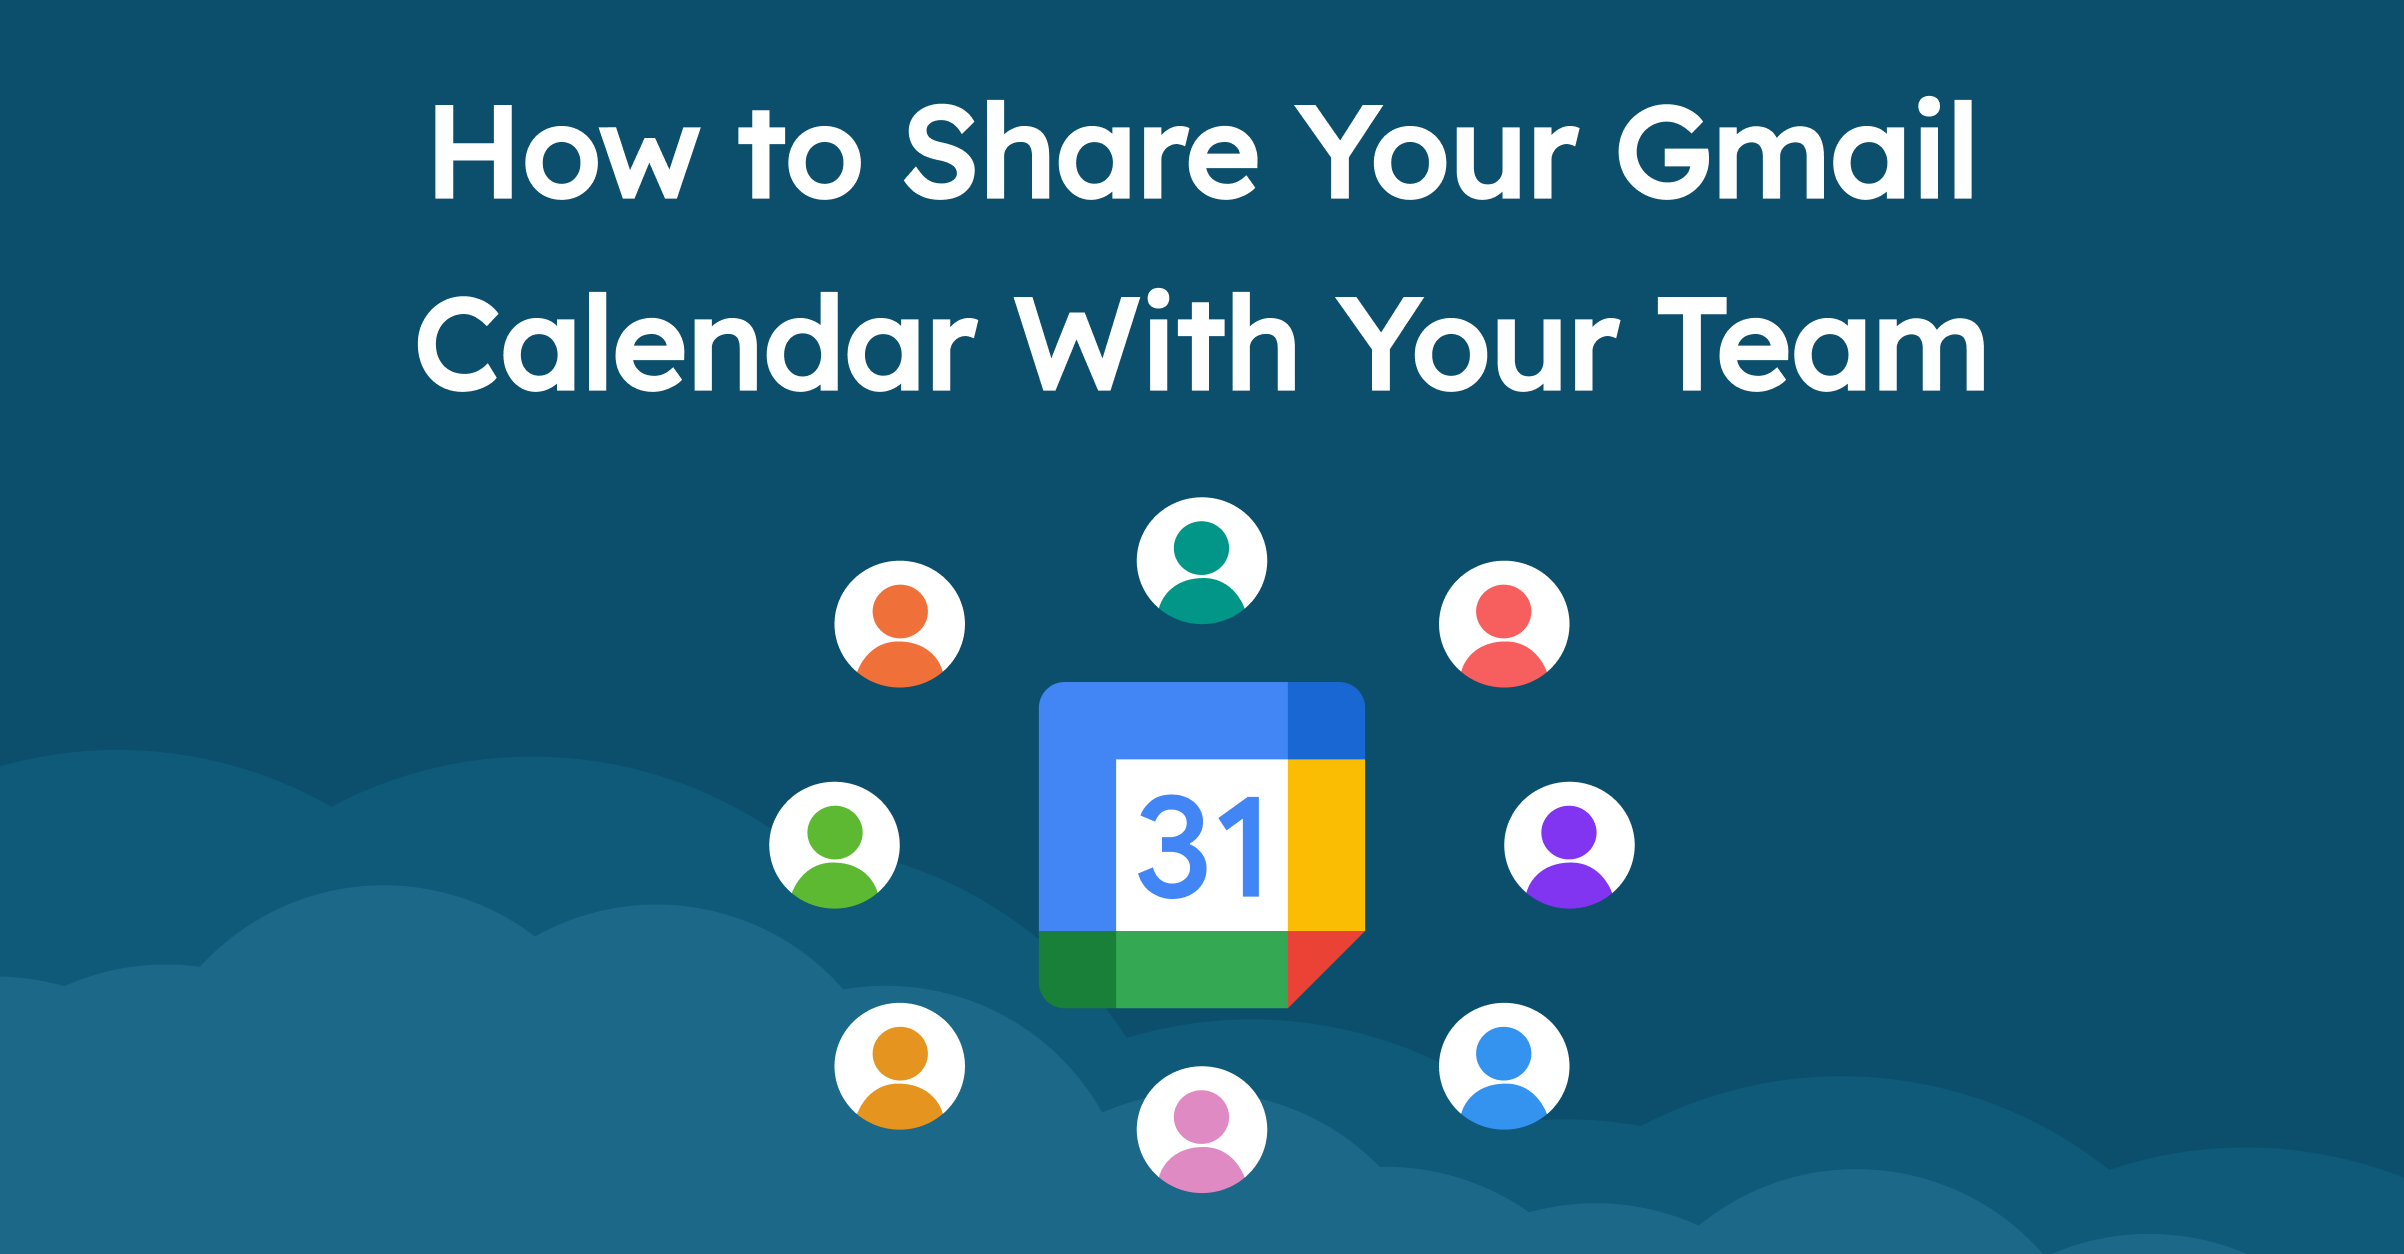 How to Share Your Google Calendar With Your Team